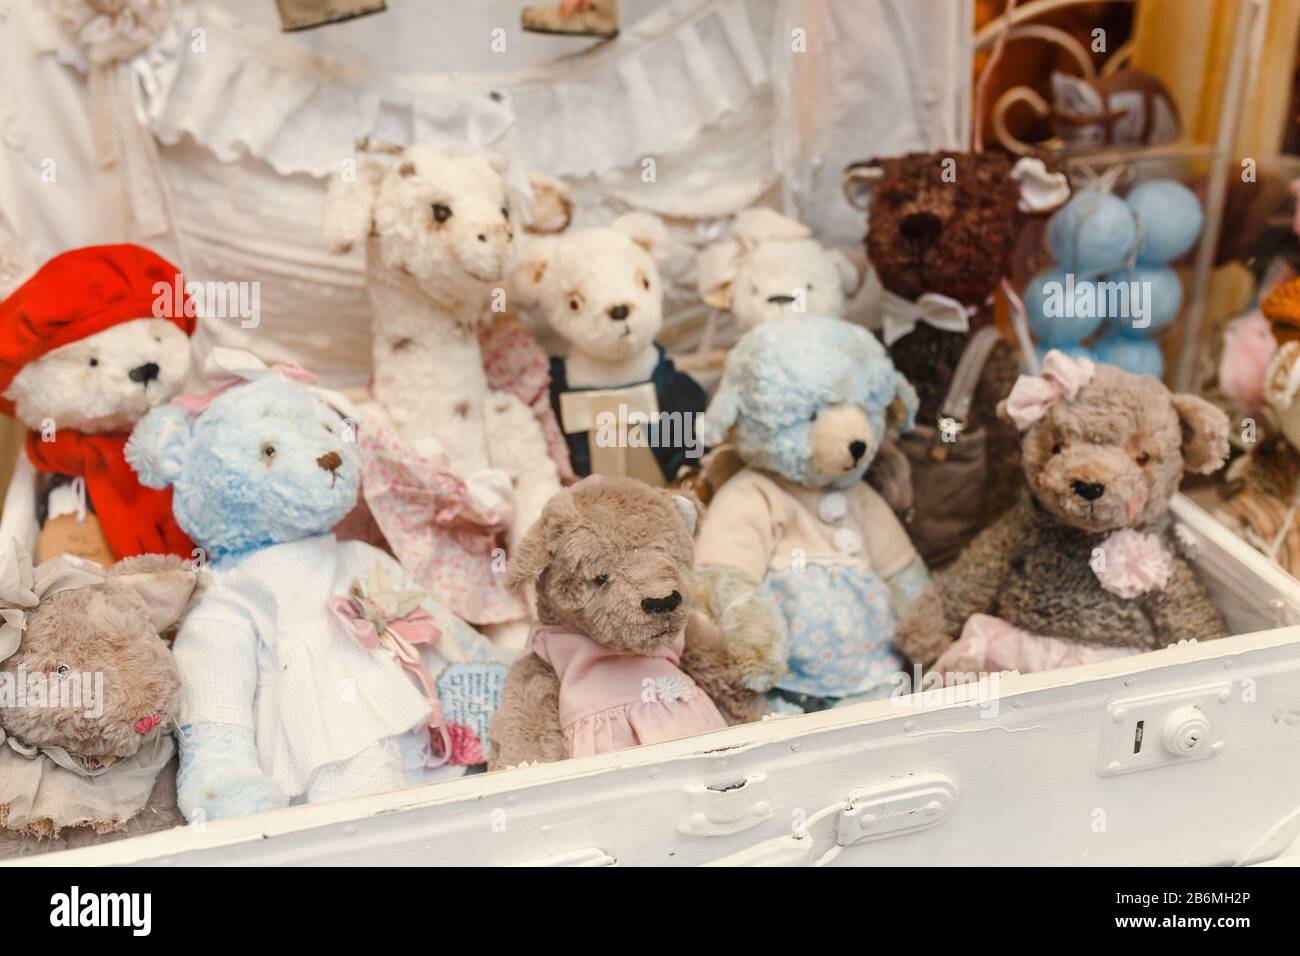 plush bears and other toys on display for sale Stock Photo